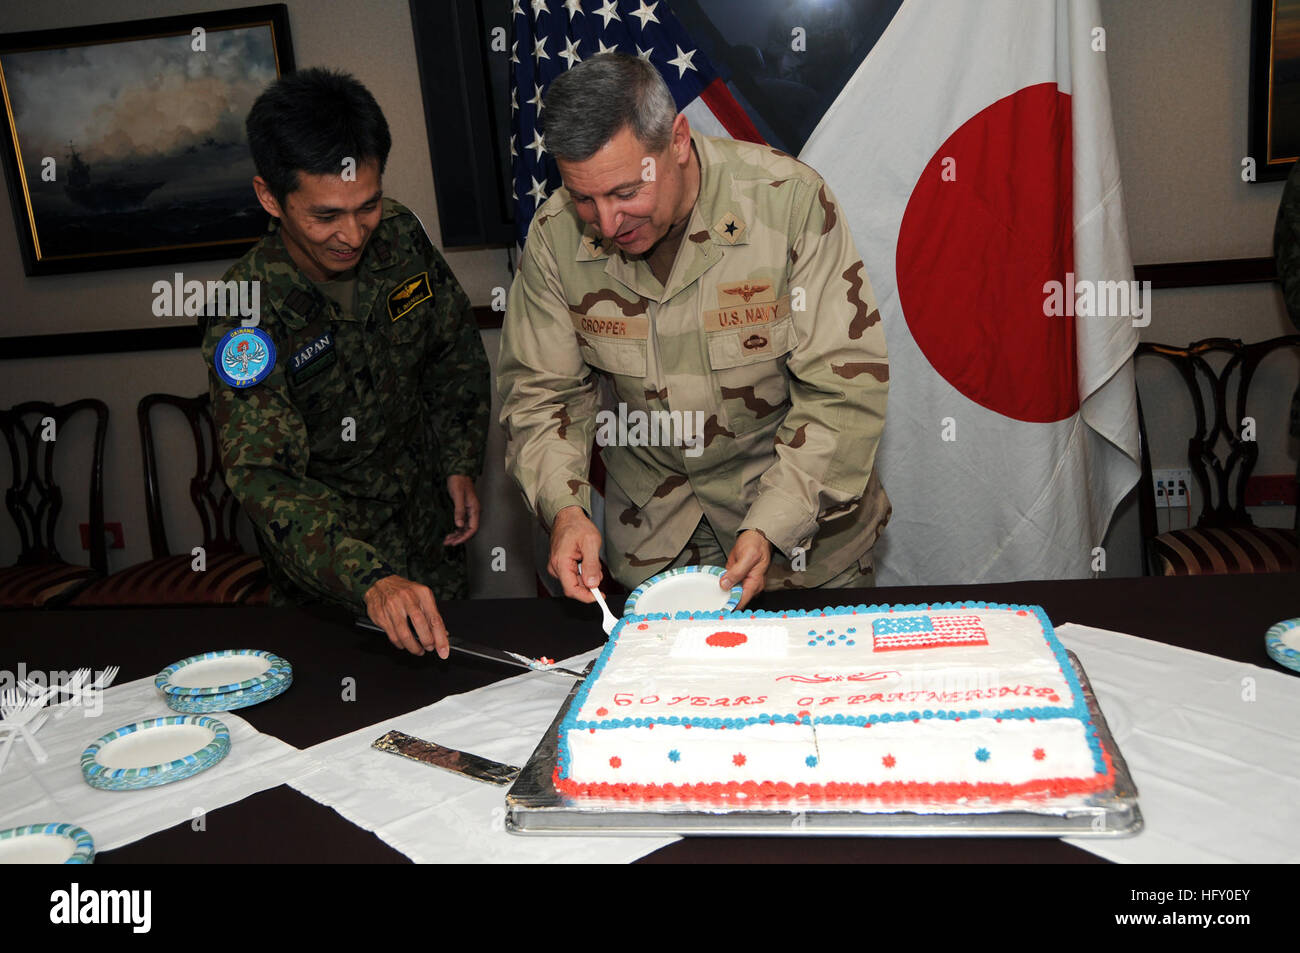 100119-N-6832D-395  MANAMA, Bahrain (Jan. 19, 2010) Rear Adm. T. C. Cropper, deputy commander of U.S. Central Command and Japan Maritime Self-Defense Force Cmdr. Eiji Imanishi prepare to cut the cake at a ceremony marking the 50th anniversary of the Treaty of Mutual Cooperation and Security between the U.S. and Japan. Signed and ratified in 1960, the treaty serves as a foundation for the strong alliance and interoperability between the U.S. Navy and the Japan Maritime Self-Defense Force. (U.S. Navy photo by Mass Communication Specialist 1st Class Brianna K. Dandridge/Released) US Navy 100119-N Stock Photo